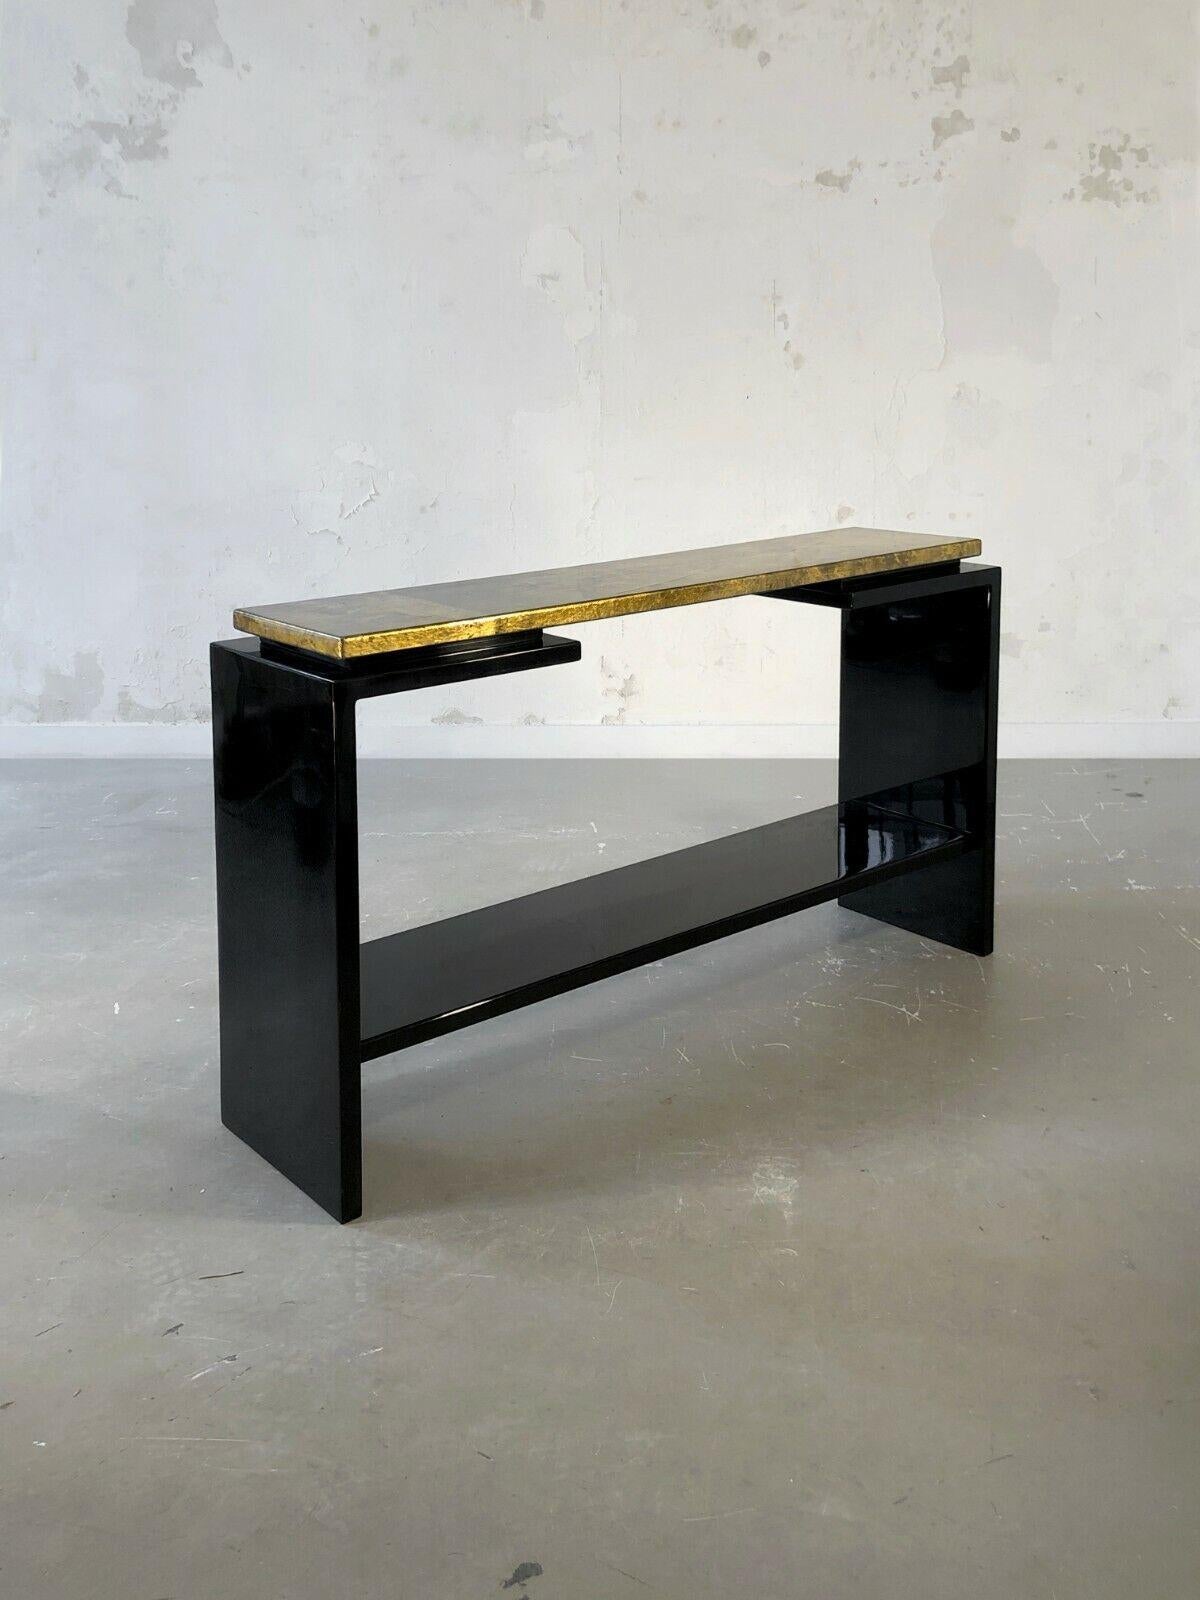 An elegant and luxurious console table with 2 trays, of Japanese inspiration, Post-Modern, Memphis, Constructivist, sophisticated geometric structure in lacquered wood, two separate trays, the one on the top lacquered with a beautiful golden leaf